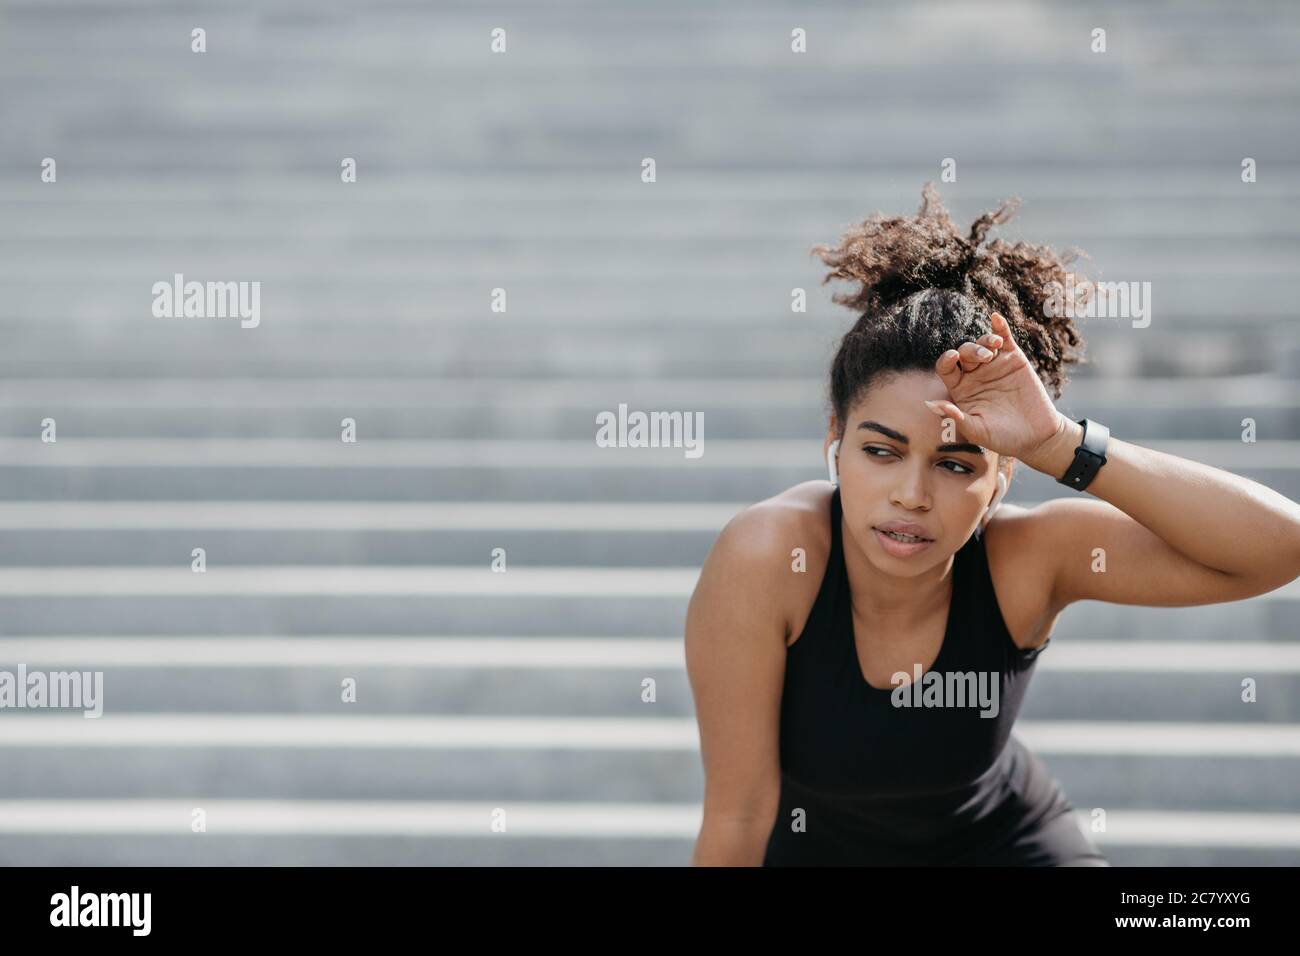 Tired girl in sportswear and smart watches wipes sweat from forehead on stairs background Stock Photo